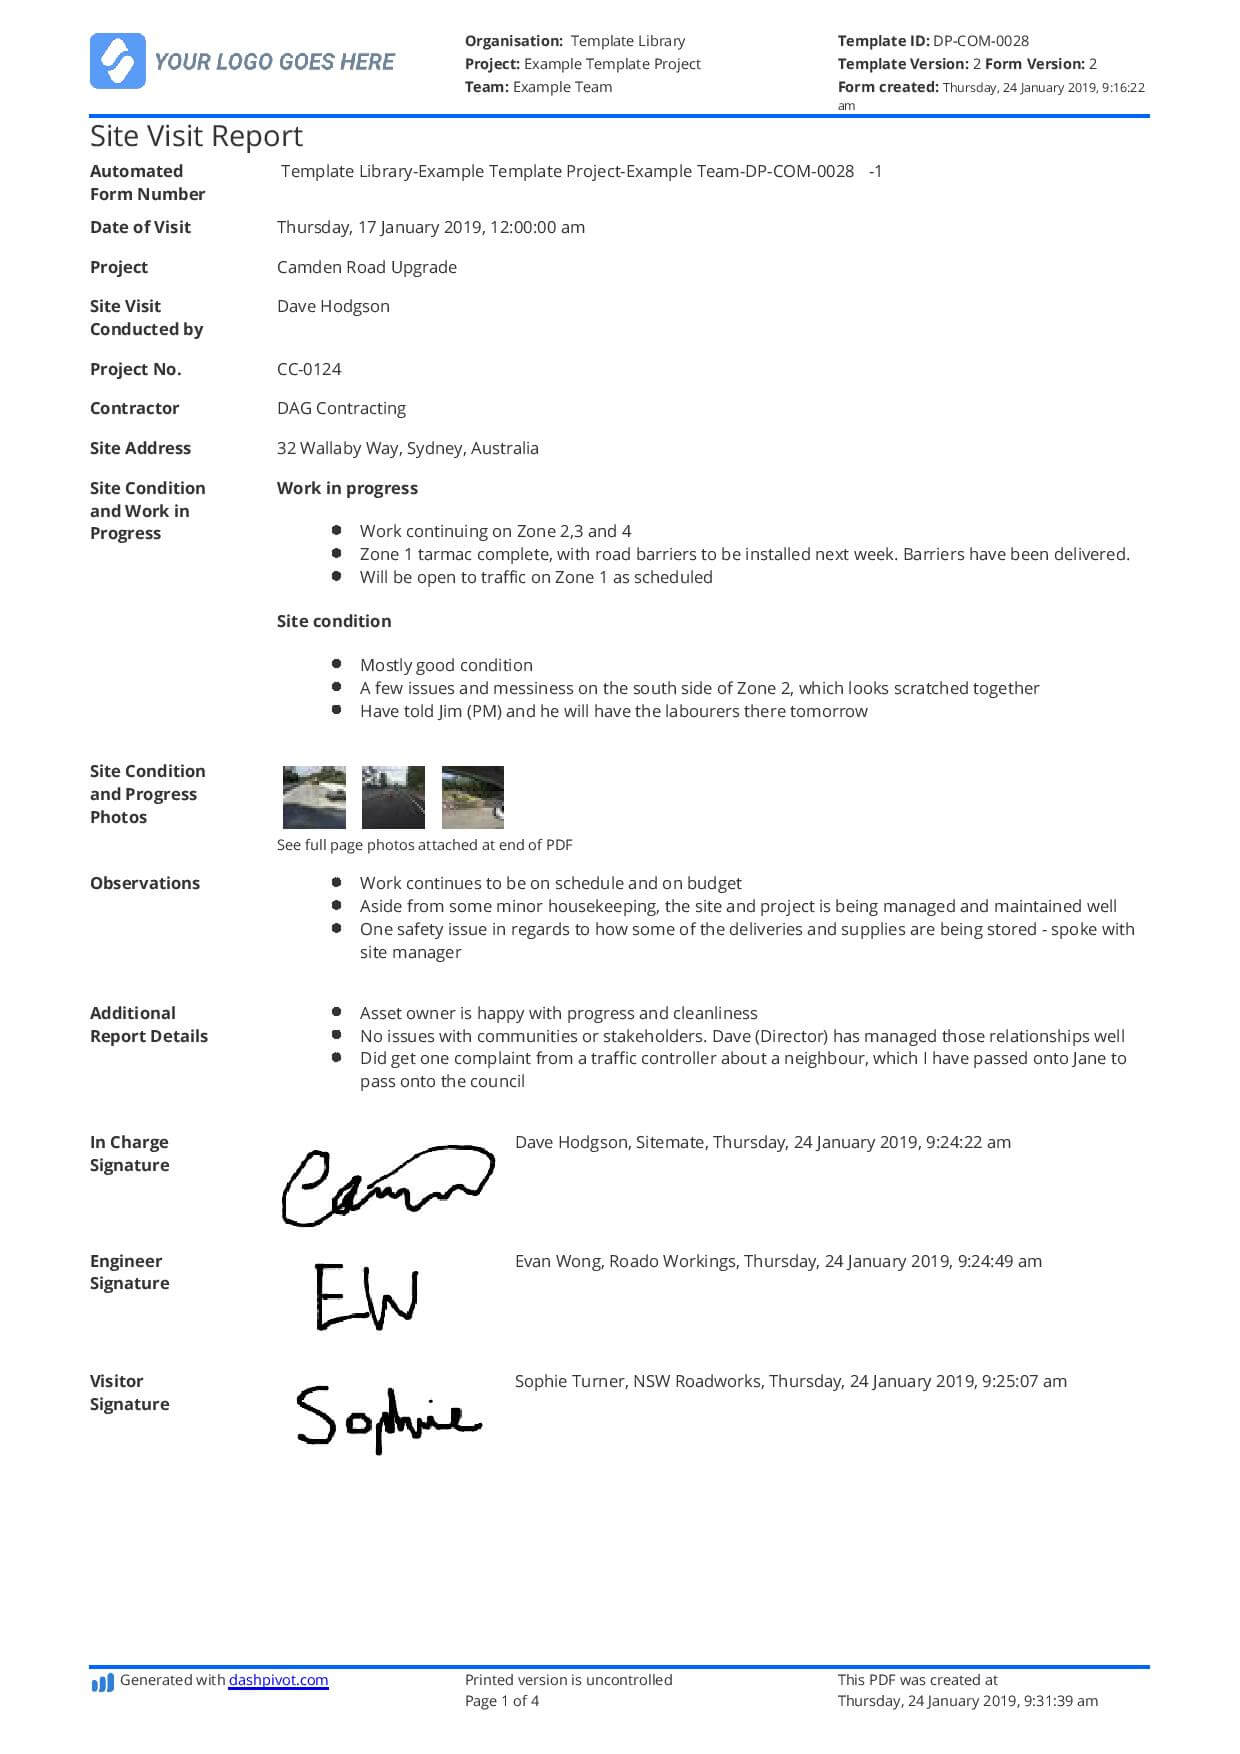 Construction Site Visit Report Template And Sample [Free To Use] For Customer Site Visit Report Template